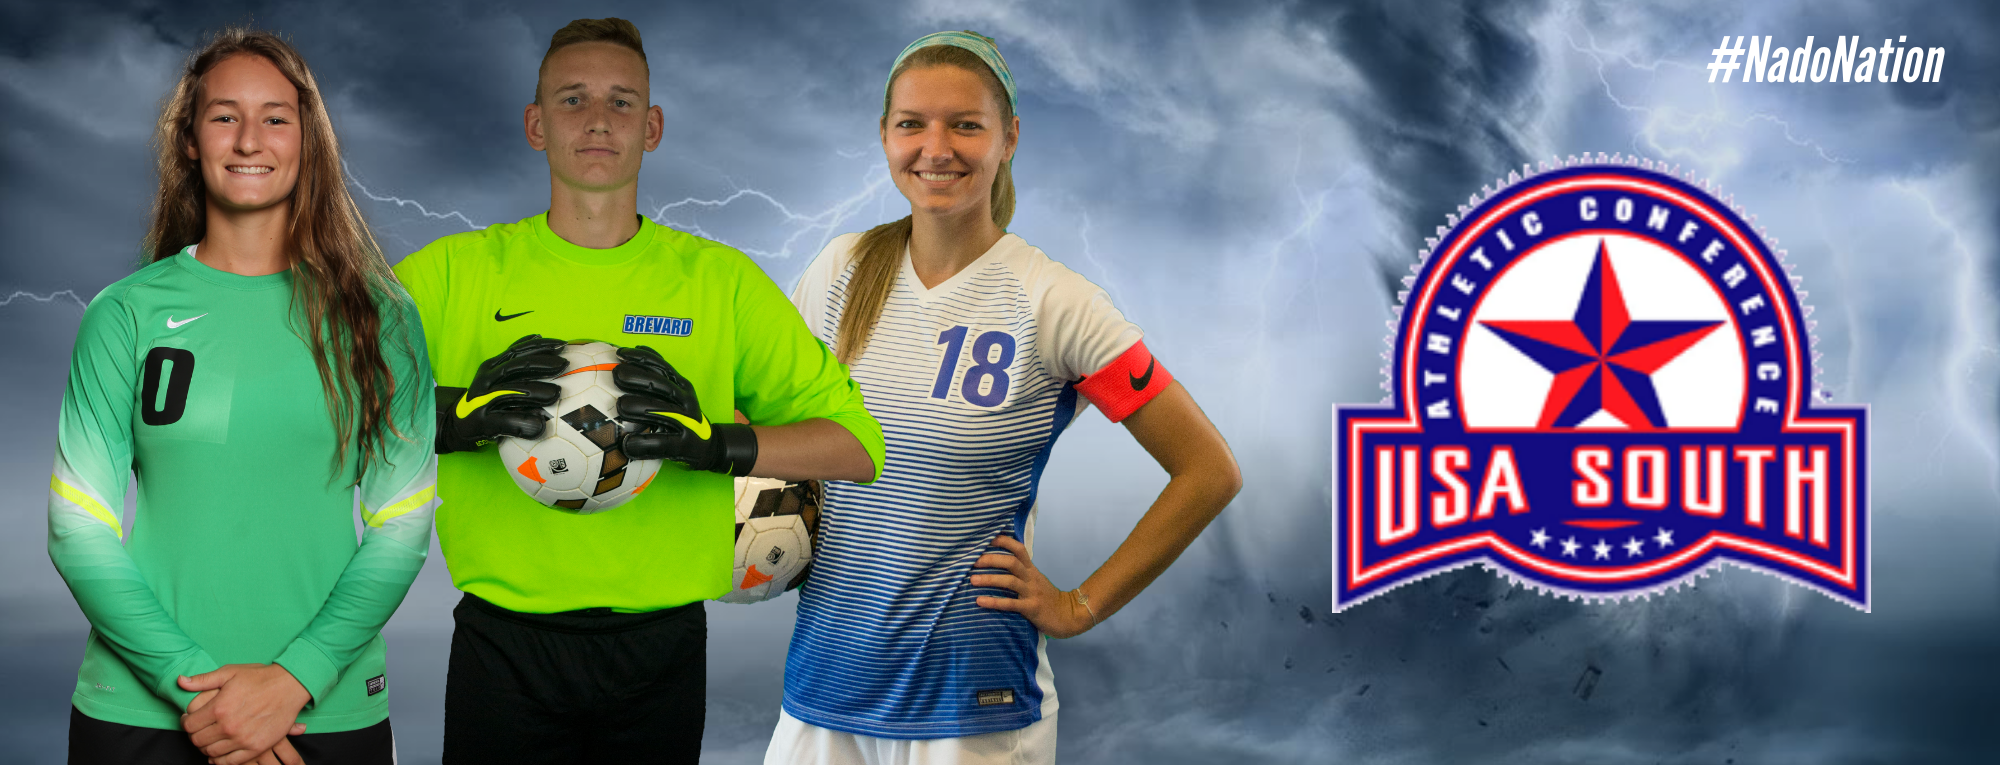 Hughes, Weatherall, and Hall Awarded Weekly USA South Honors